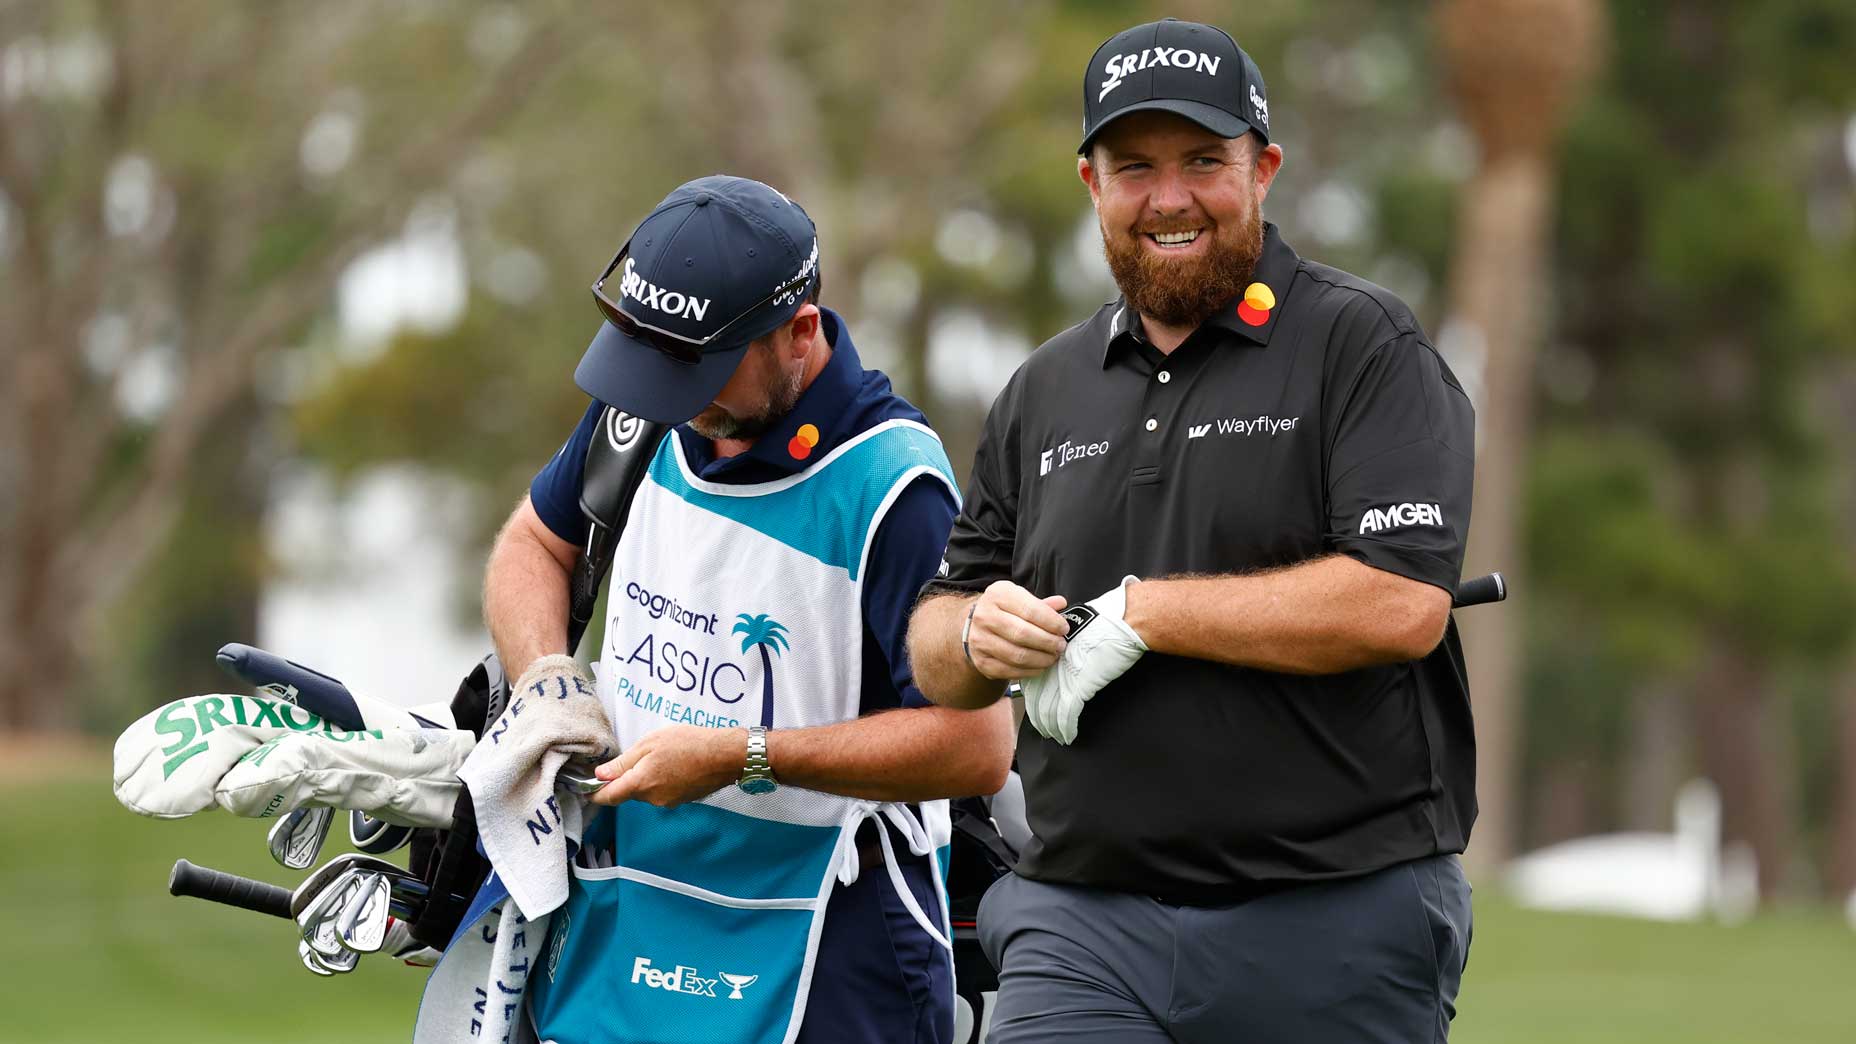 Shane Lowry smiles next to his caddie at the Cognizant Classic.